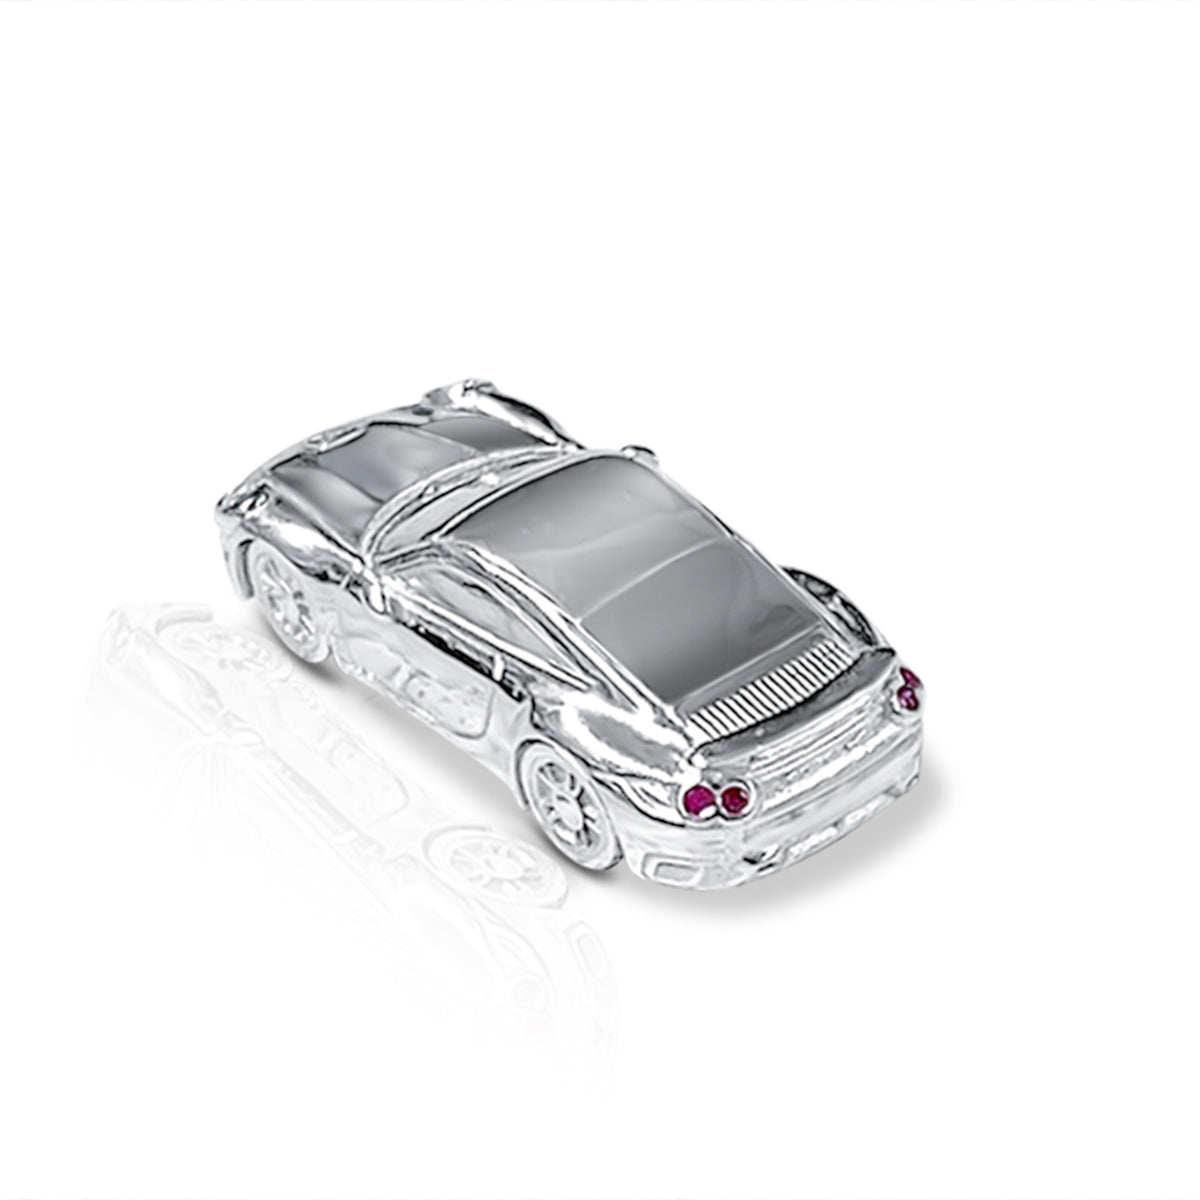 Porche 911 GT Turbo S, platinum set with White Diamonds as front lights and rubies at the back - LaParra Jewels-bespoke and one of a kind fine jewellery-london